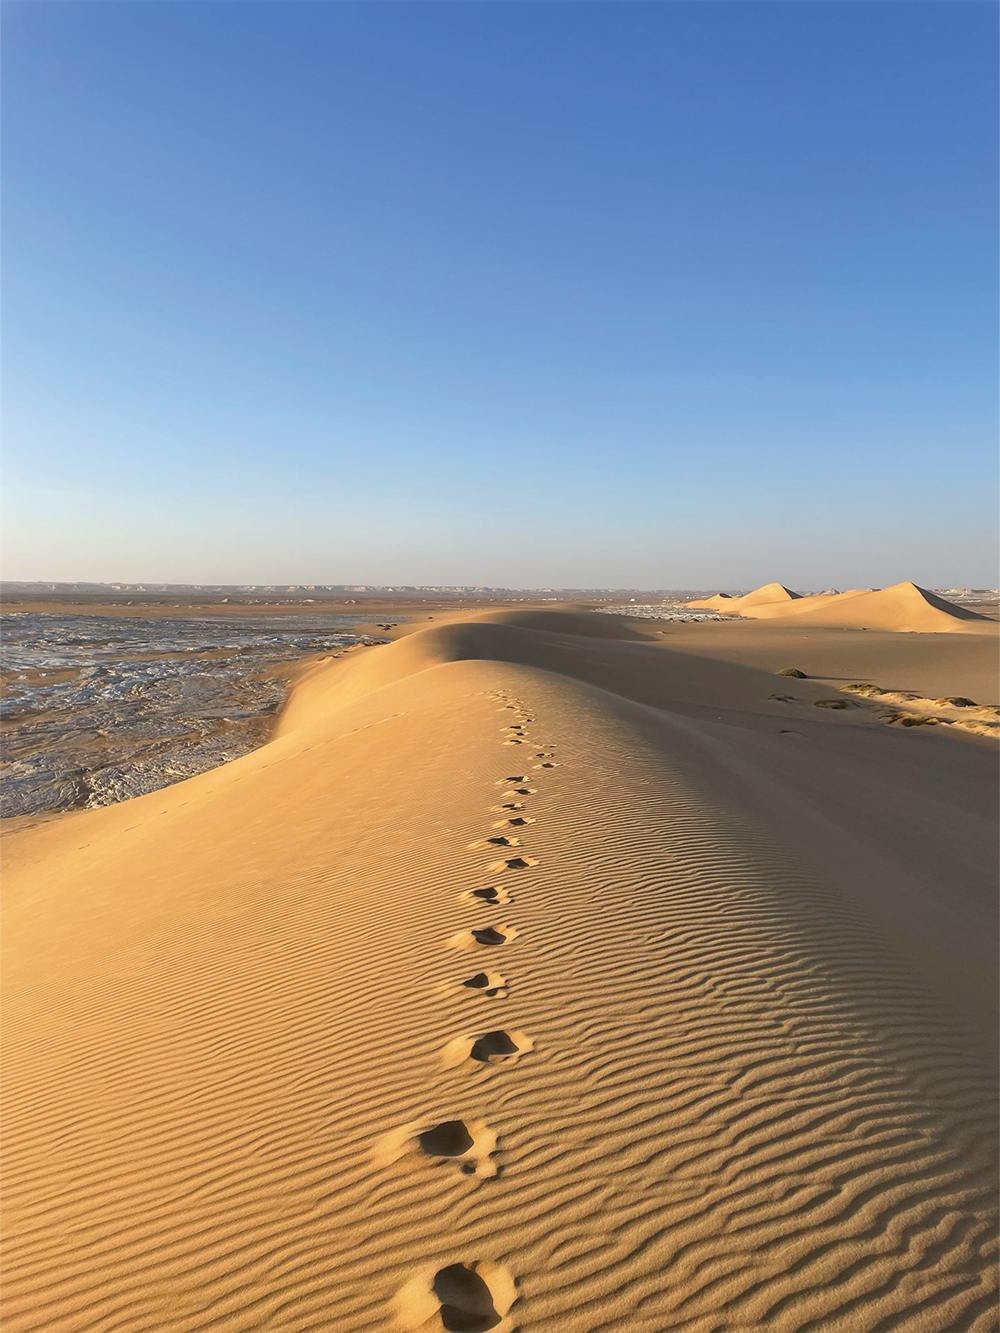 Egyptian Sahara with footprints in the sand.